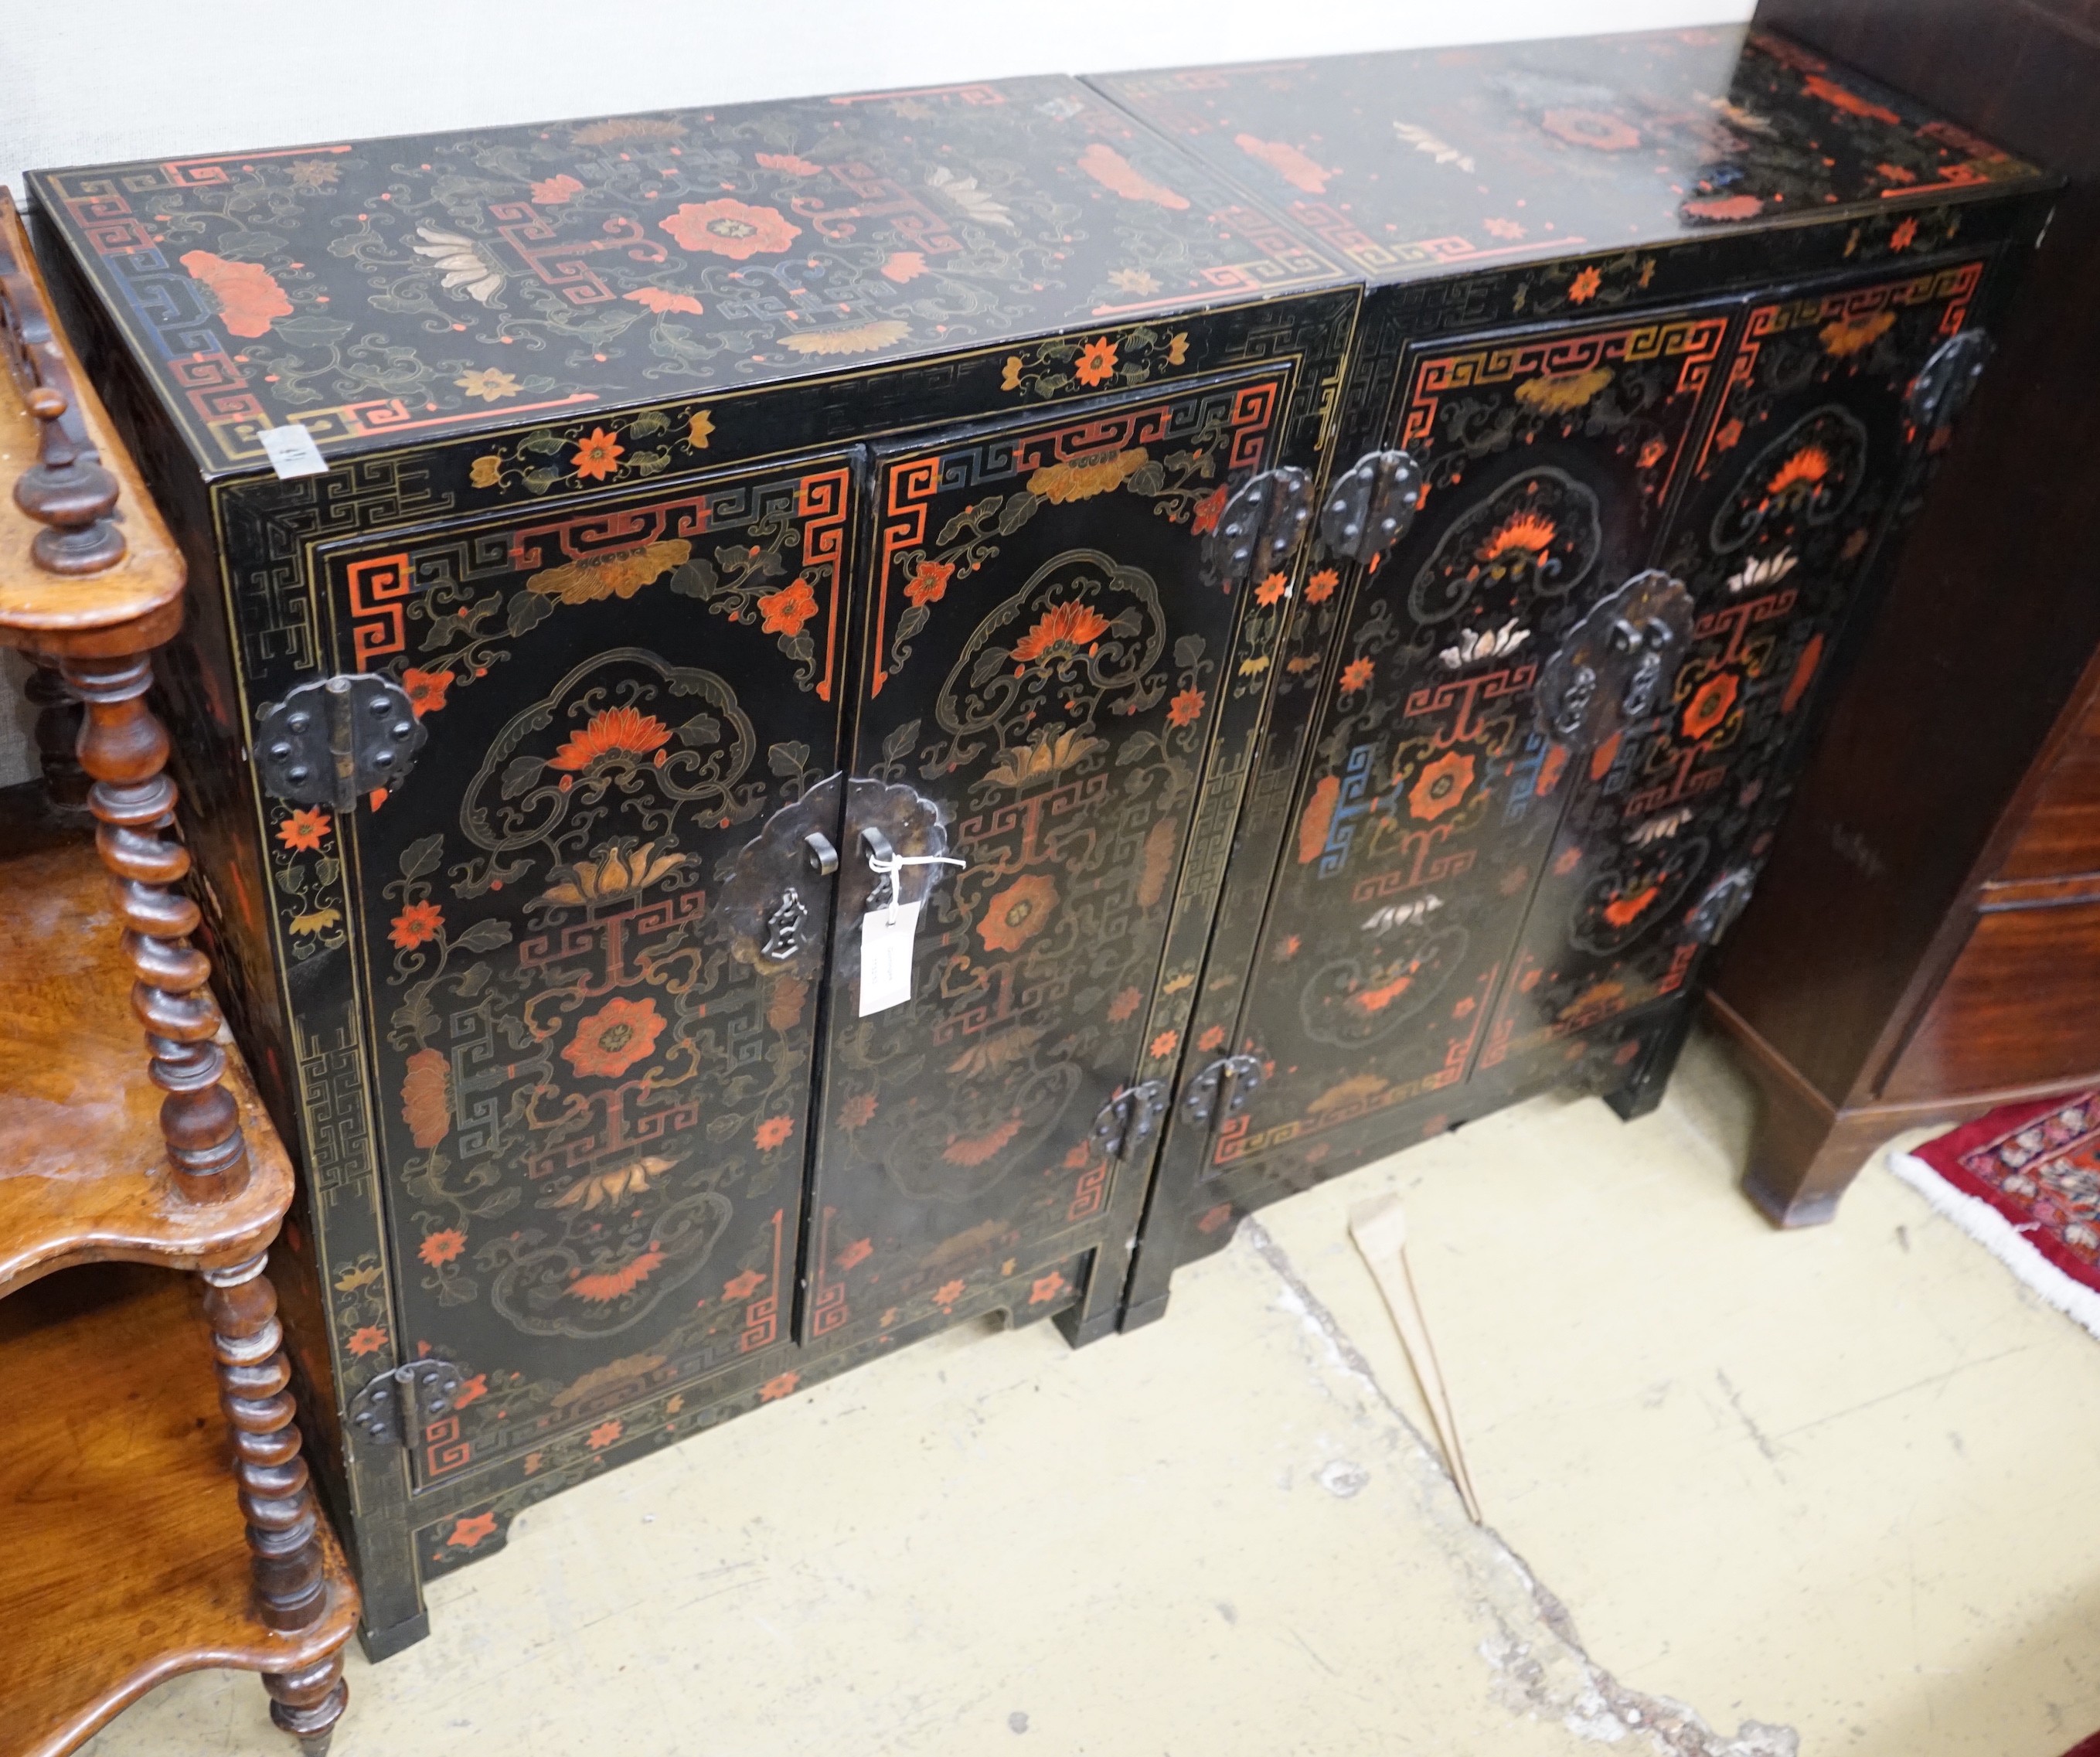 A pair of Chinese painted two door side cabinets, width 61cm, depth 31cm, height 93cm